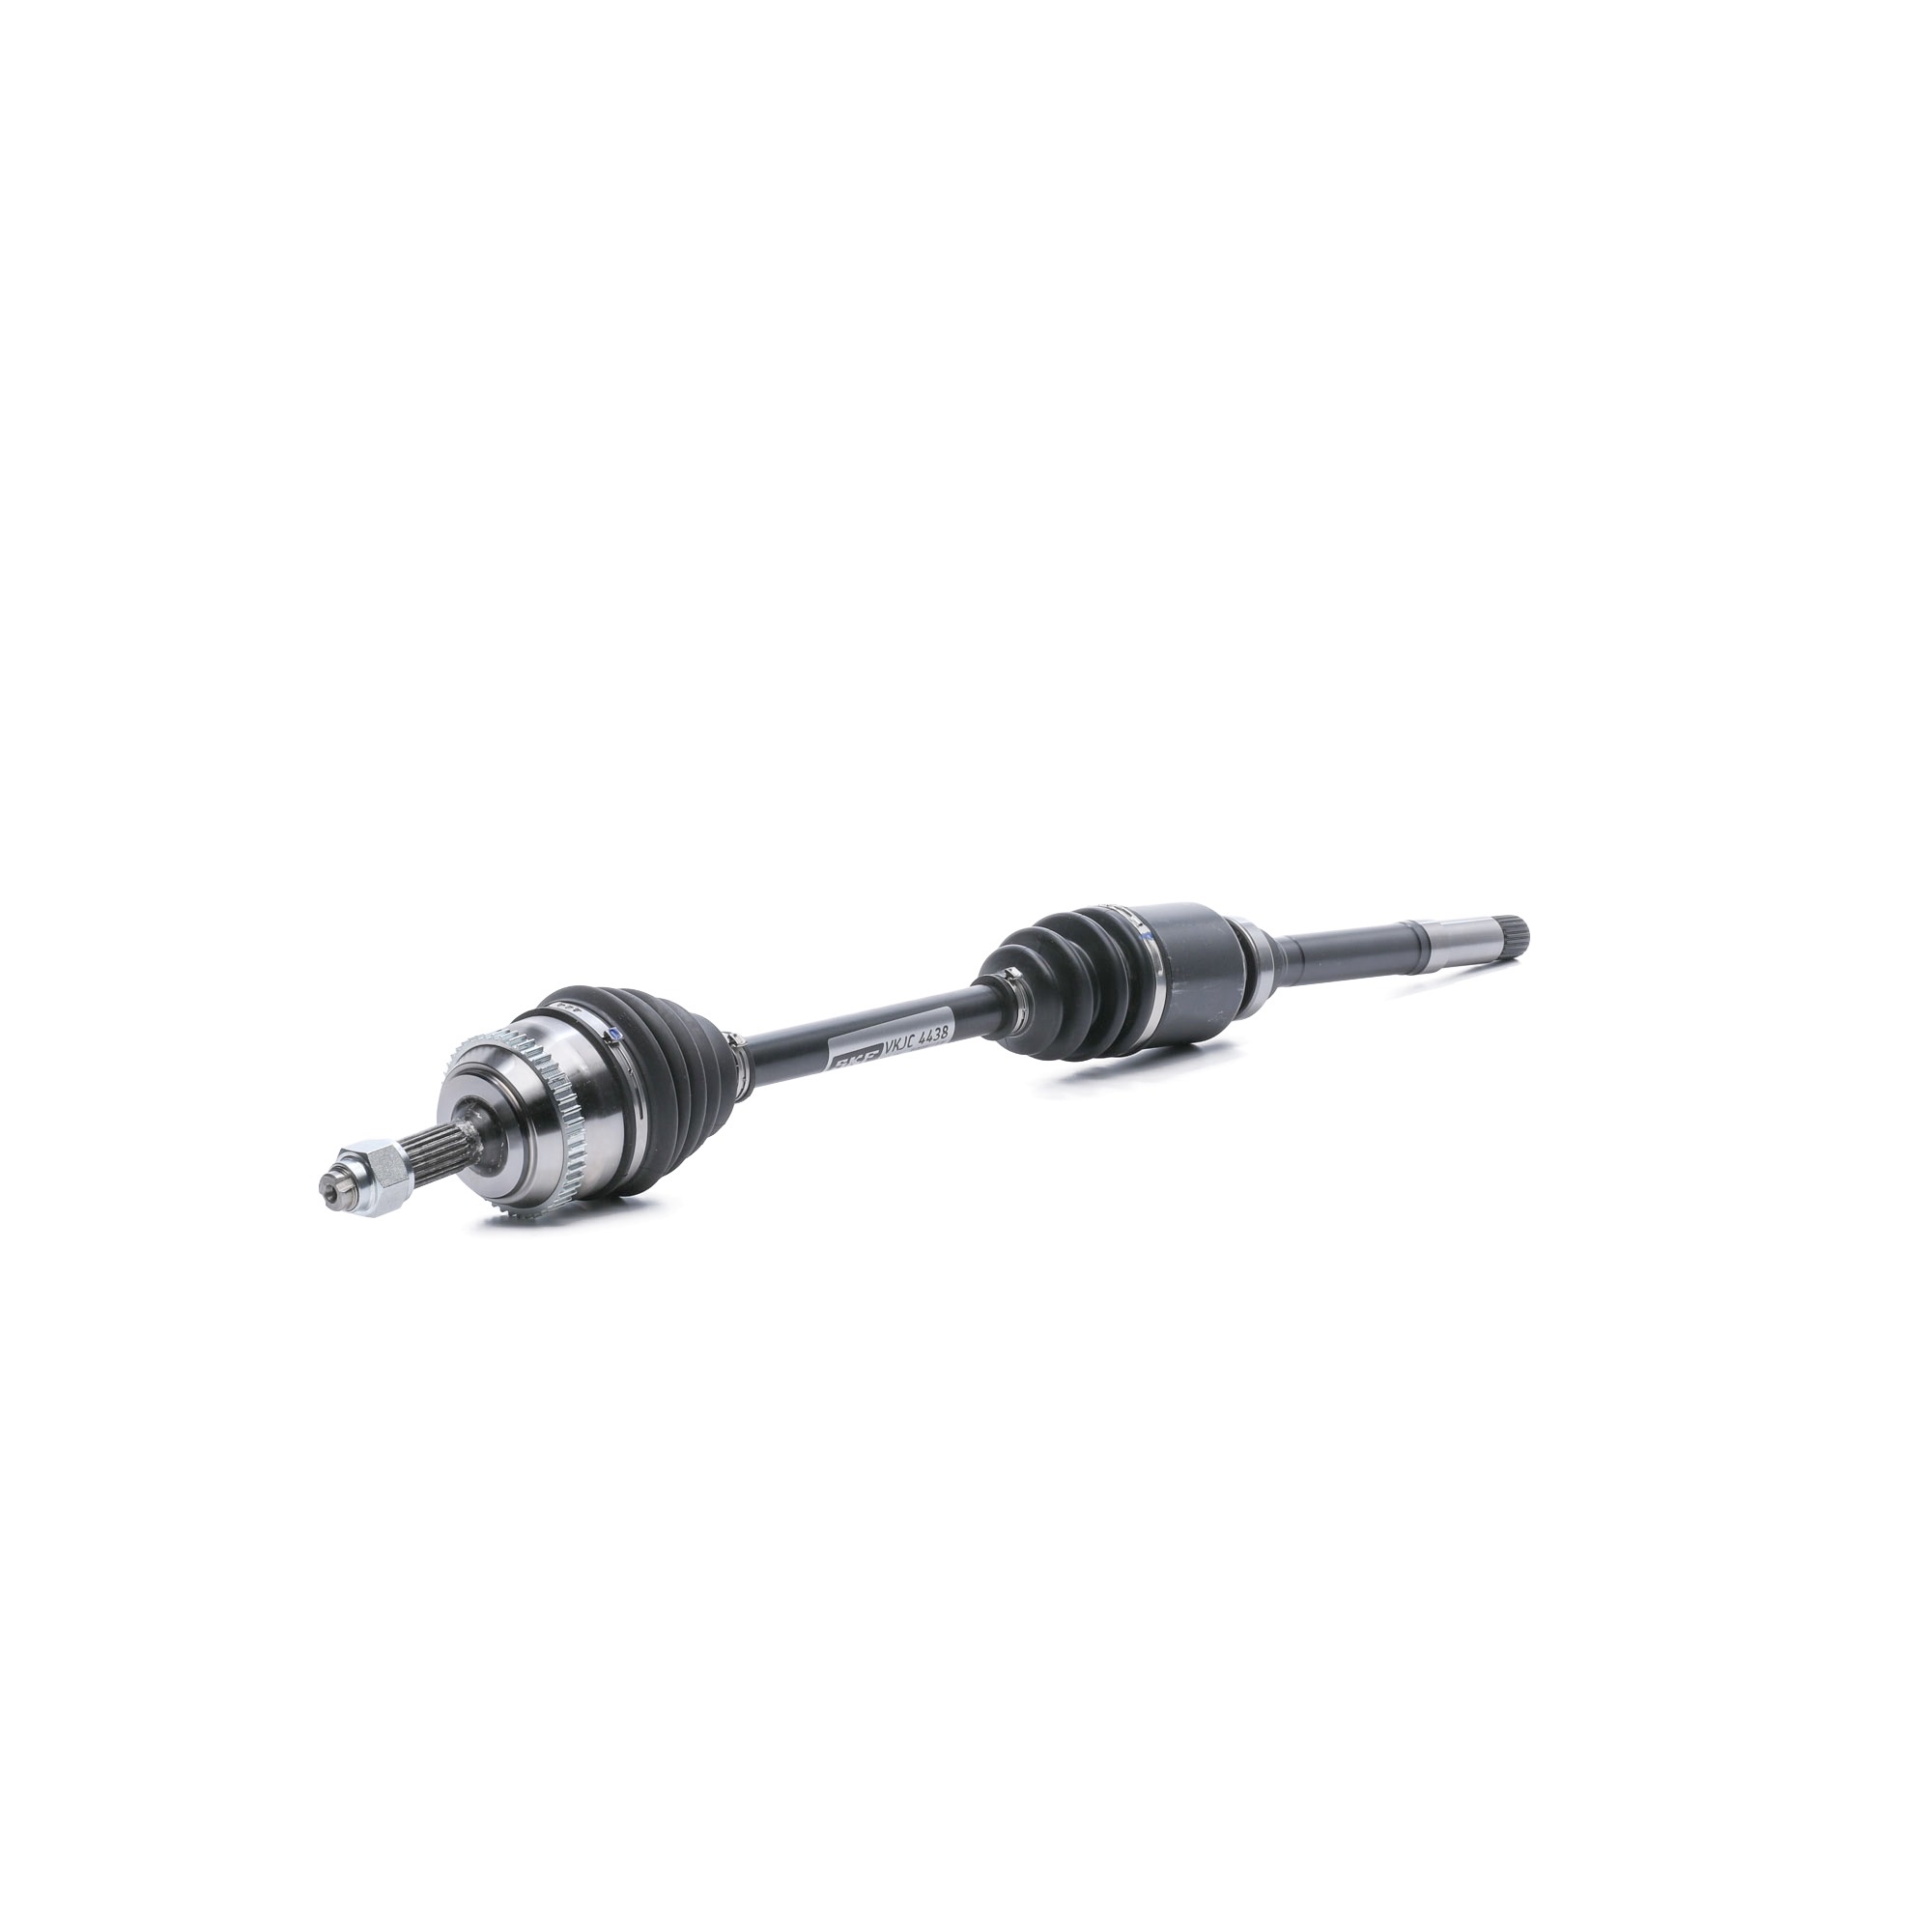 Peugeot Drive shaft SKF VKJC 4438 at a good price